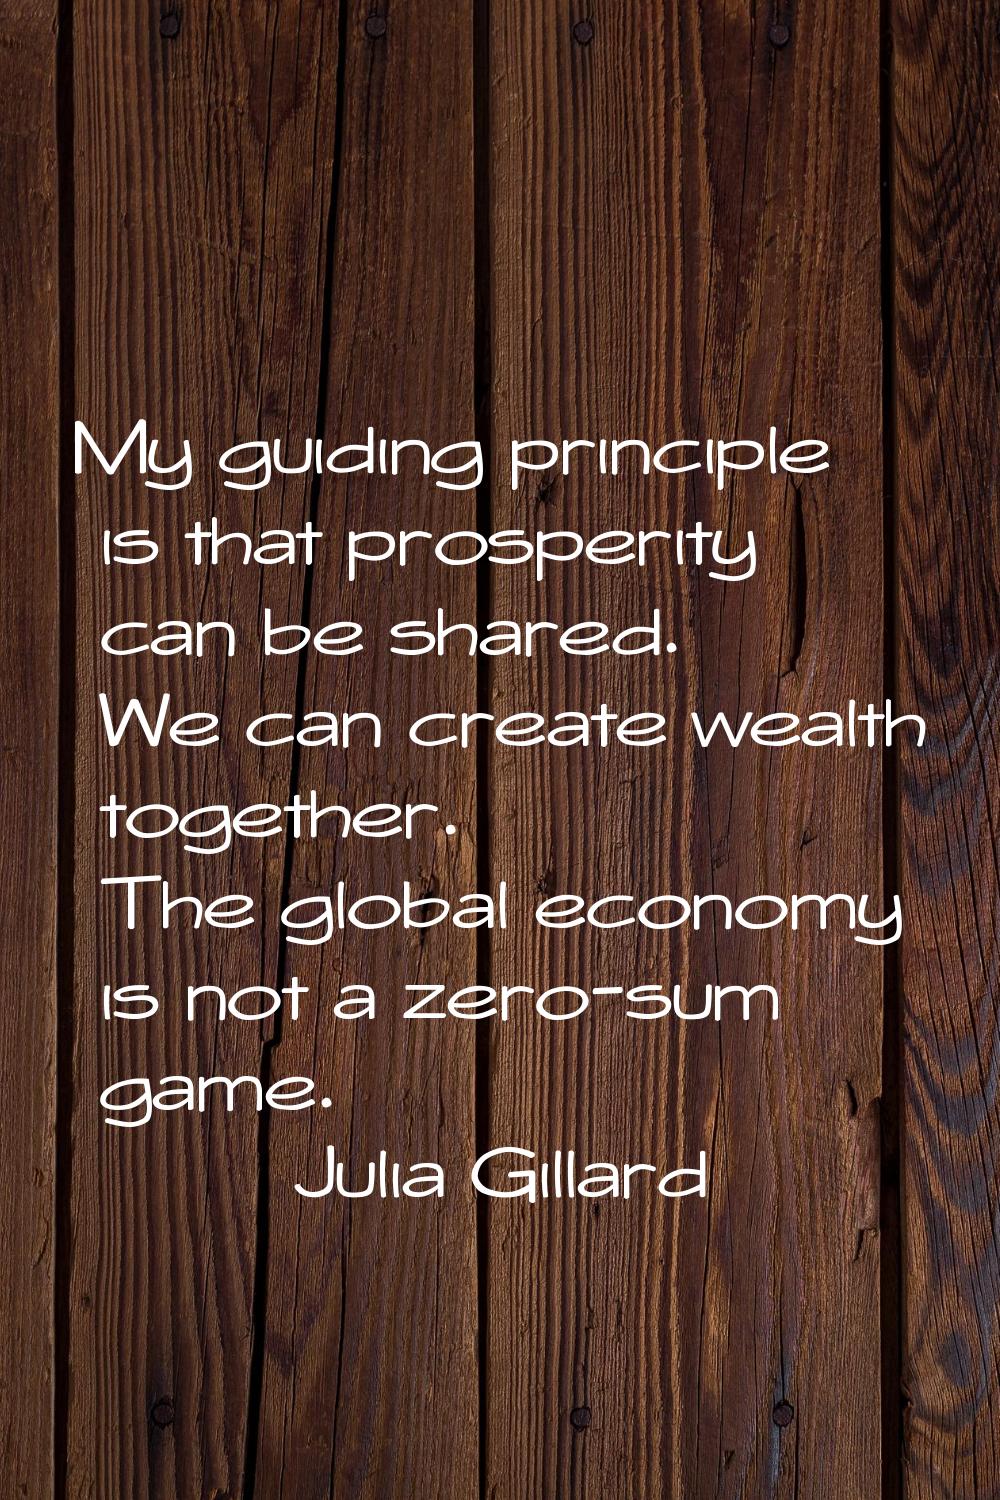 My guiding principle is that prosperity can be shared. We can create wealth together. The global ec